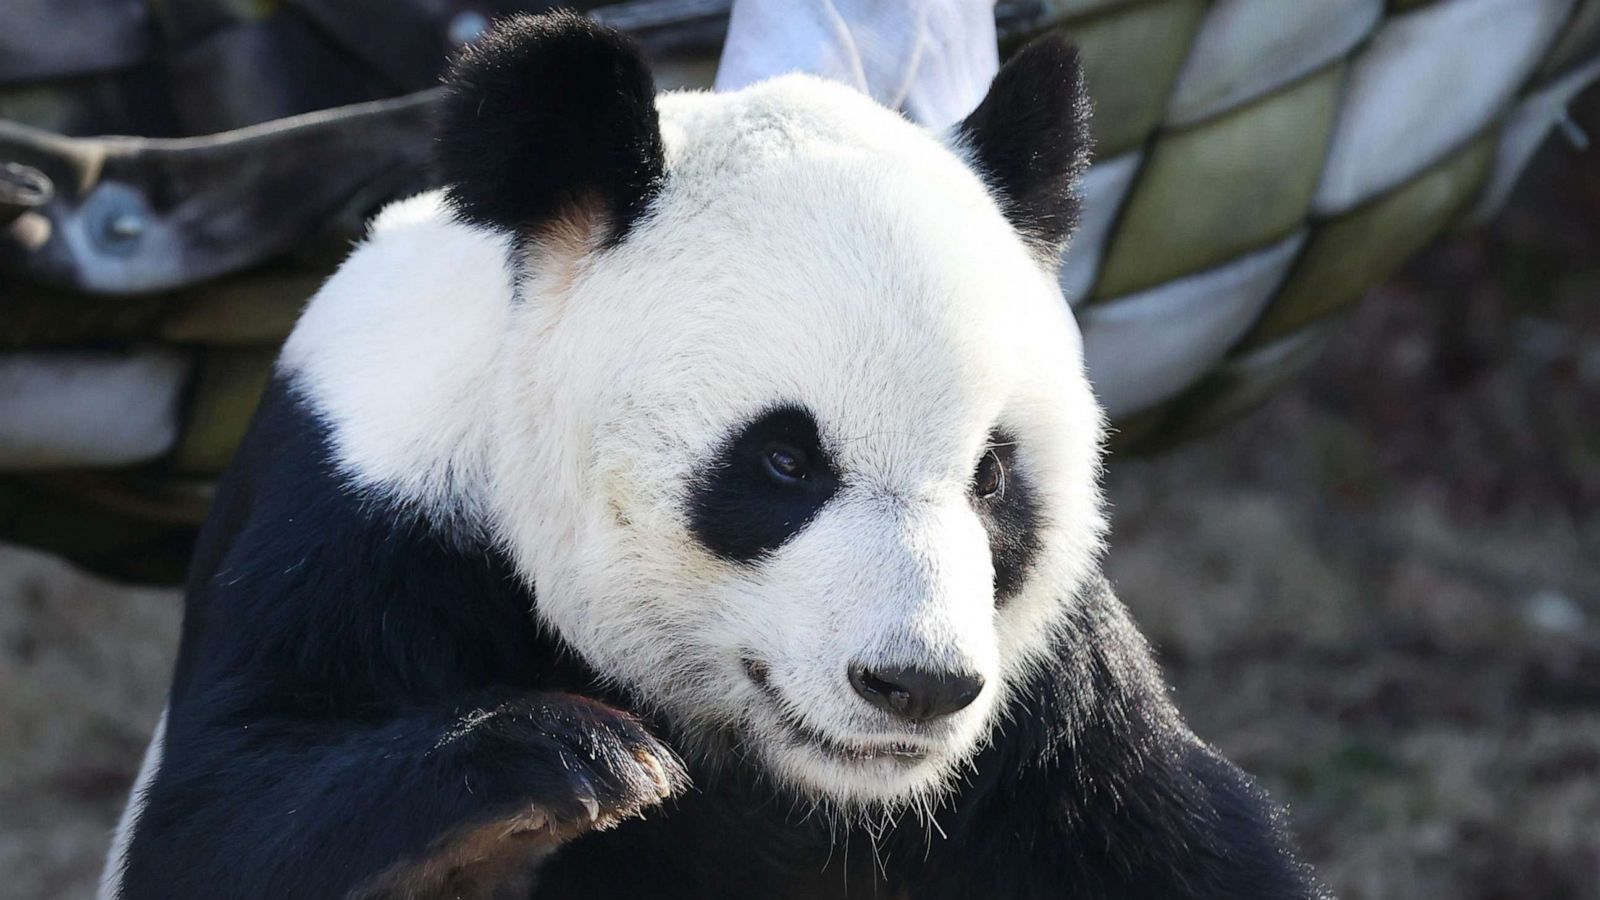 Giant panda Le Le dies after 20 years at Memphis Zoo - ABC News